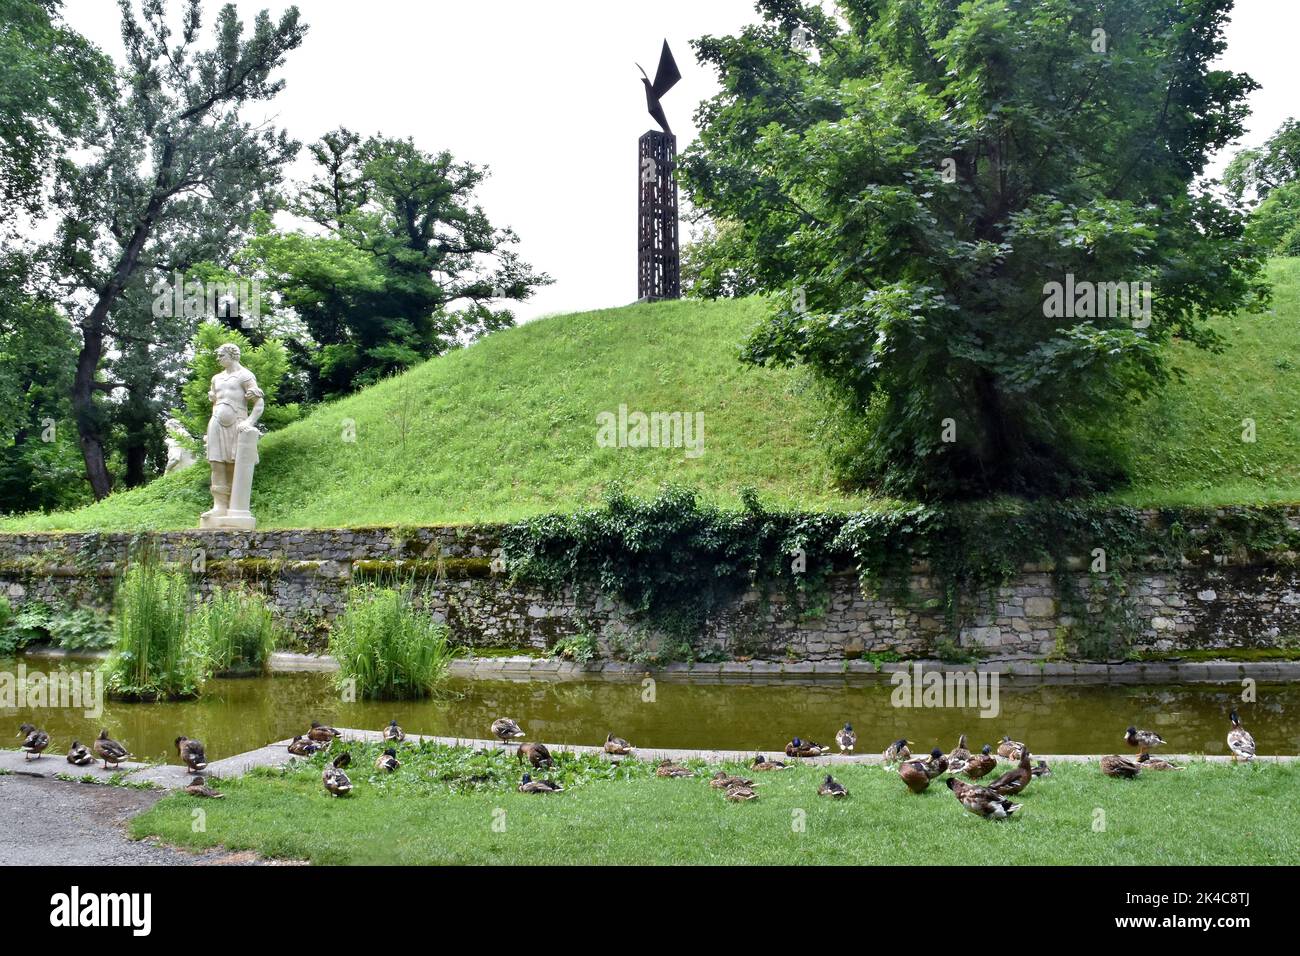 The view of trees and sculptures by the pond in the Graz Stadtpark on a sunny day Stock Photo